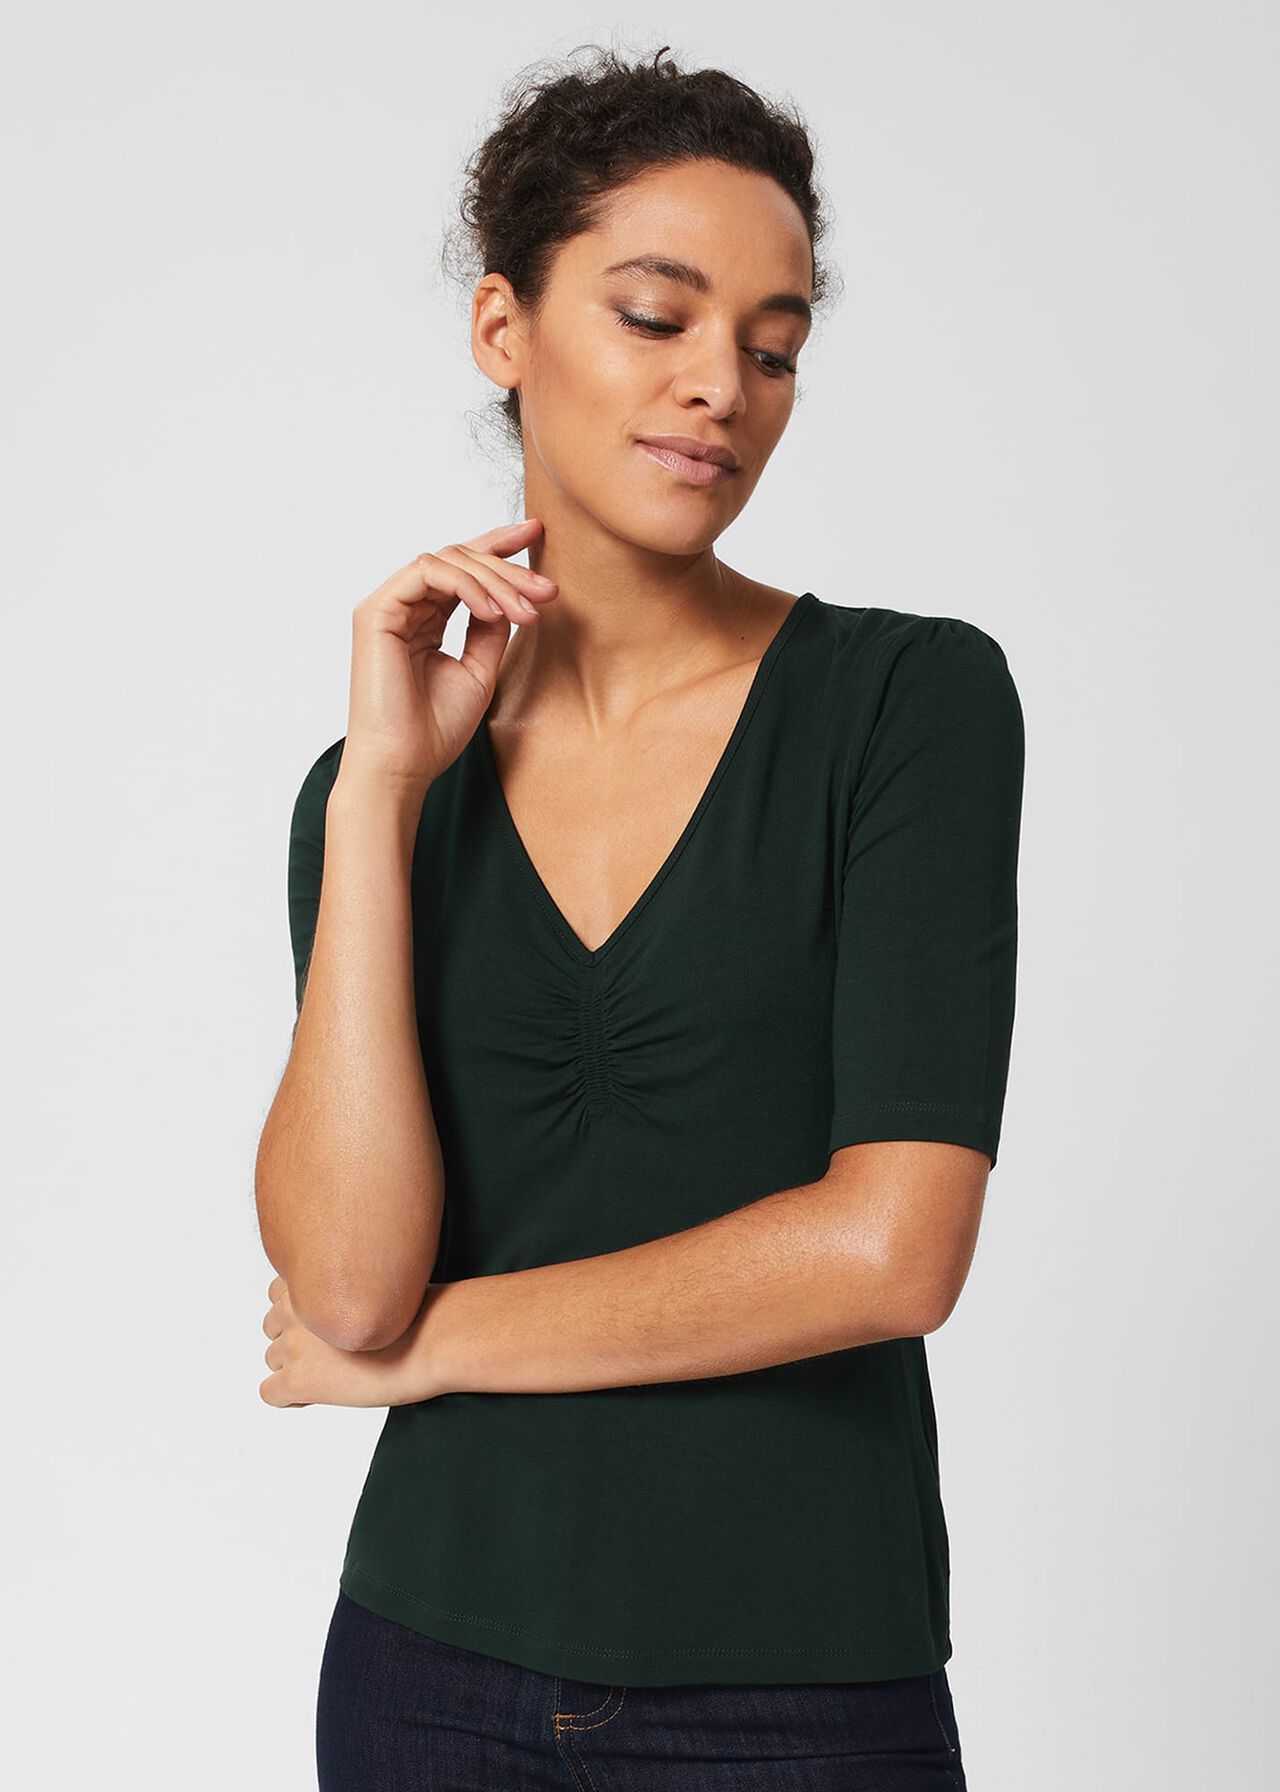 Erica Ruched Detail Top, Green, hi-res